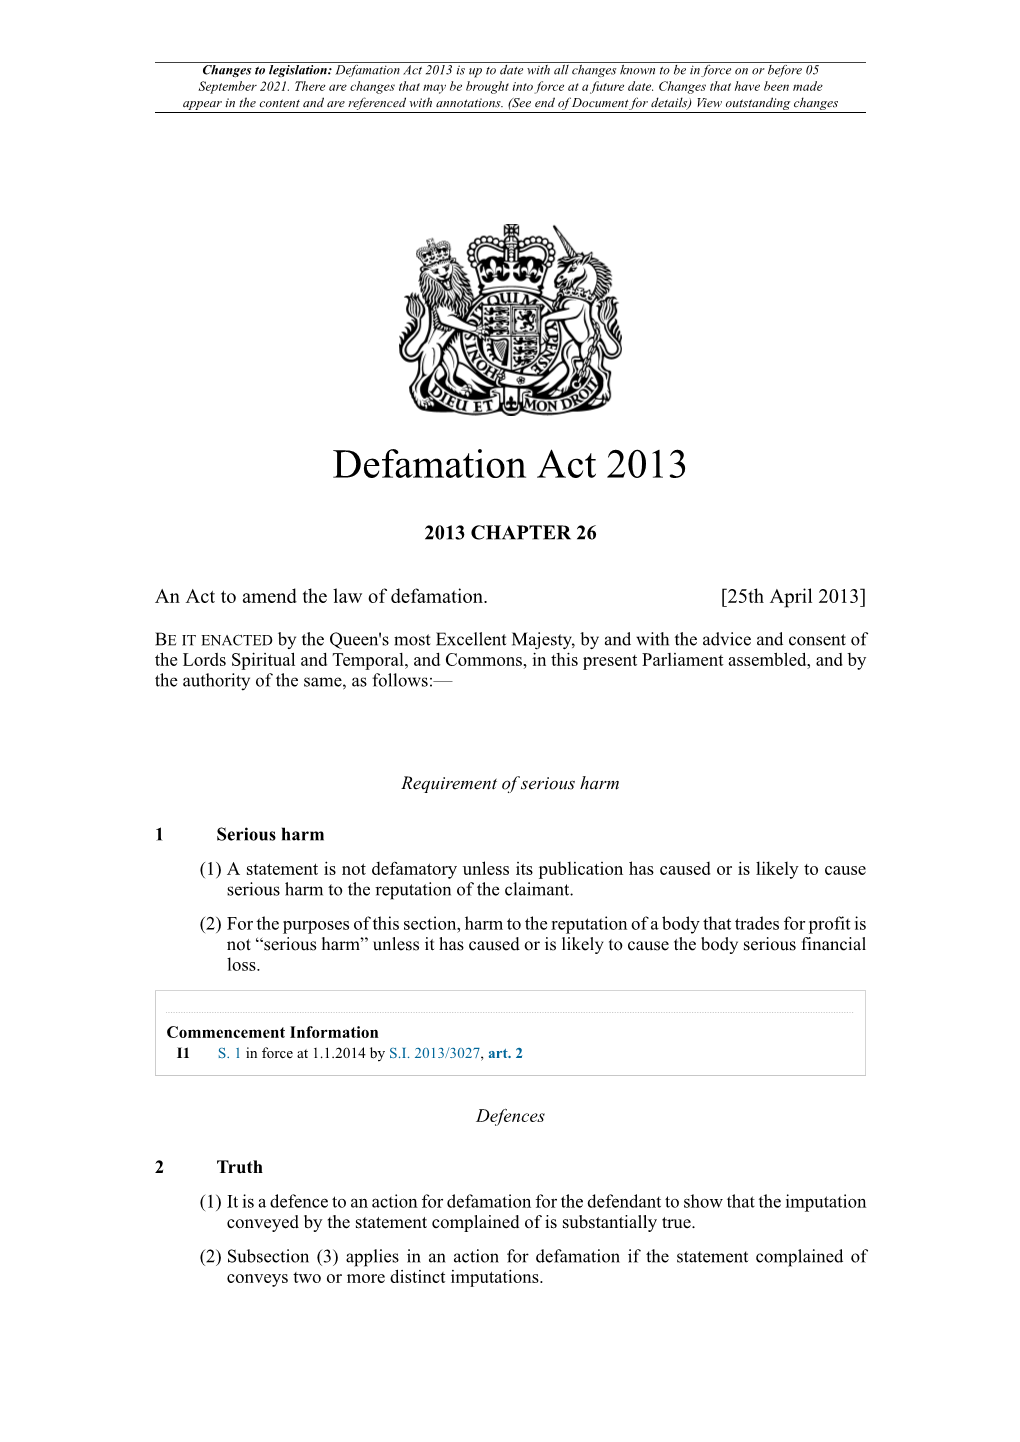 Defamation Act 2013 Is up to Date with All Changes Known to Be in Force on Or Before 05 September 2021